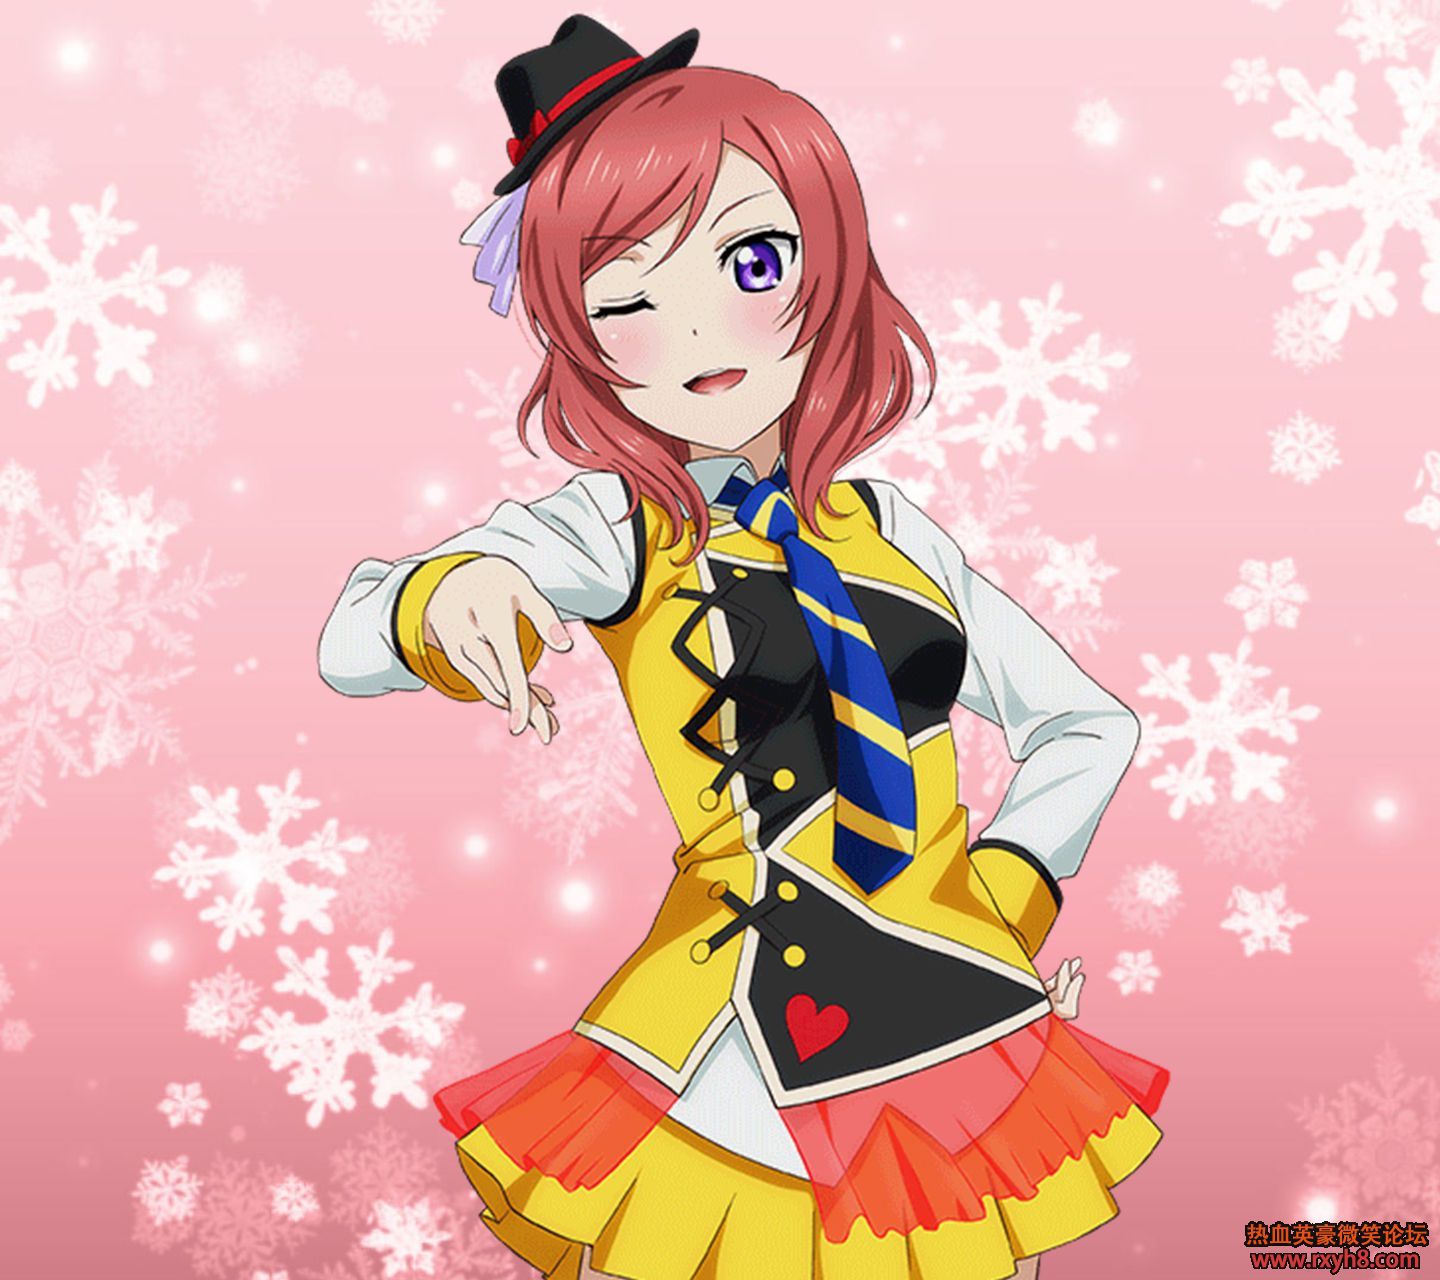 27960_lovelive_Android.jpg